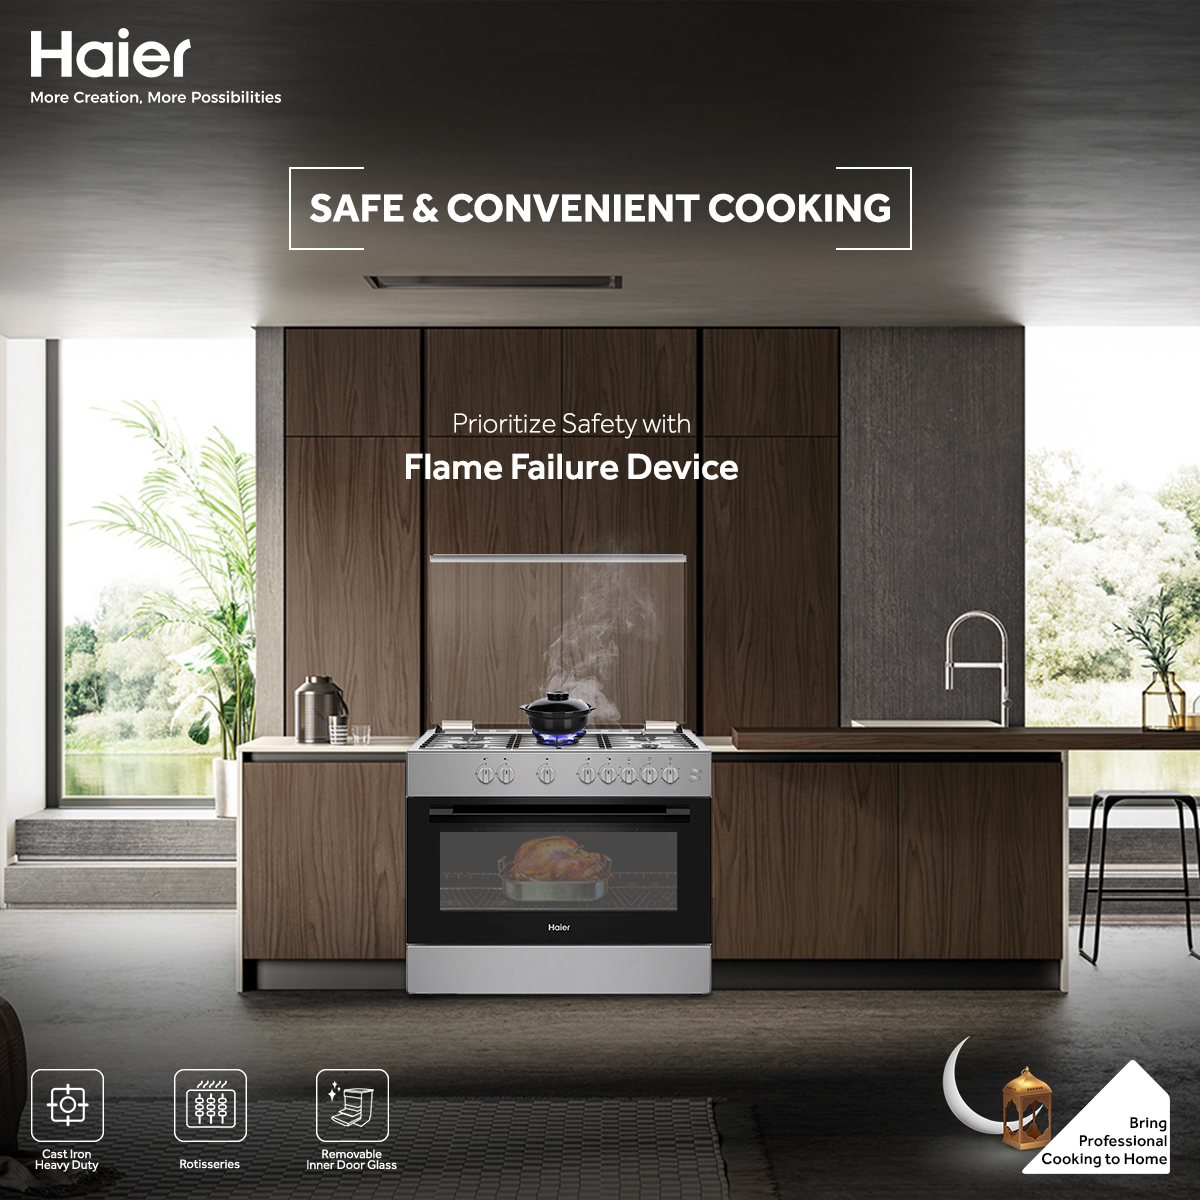 Cook with peace of mind with Haier Cookers. Our Flame Failure Device prioritizes safety in the kitchen, giving you the confidence to whip up delicious meals worry-free.

#HaierInUAE #haier_gulf  #smarthome #haier #technologythatfits #HaierLiving #morecreation #morepossibilities